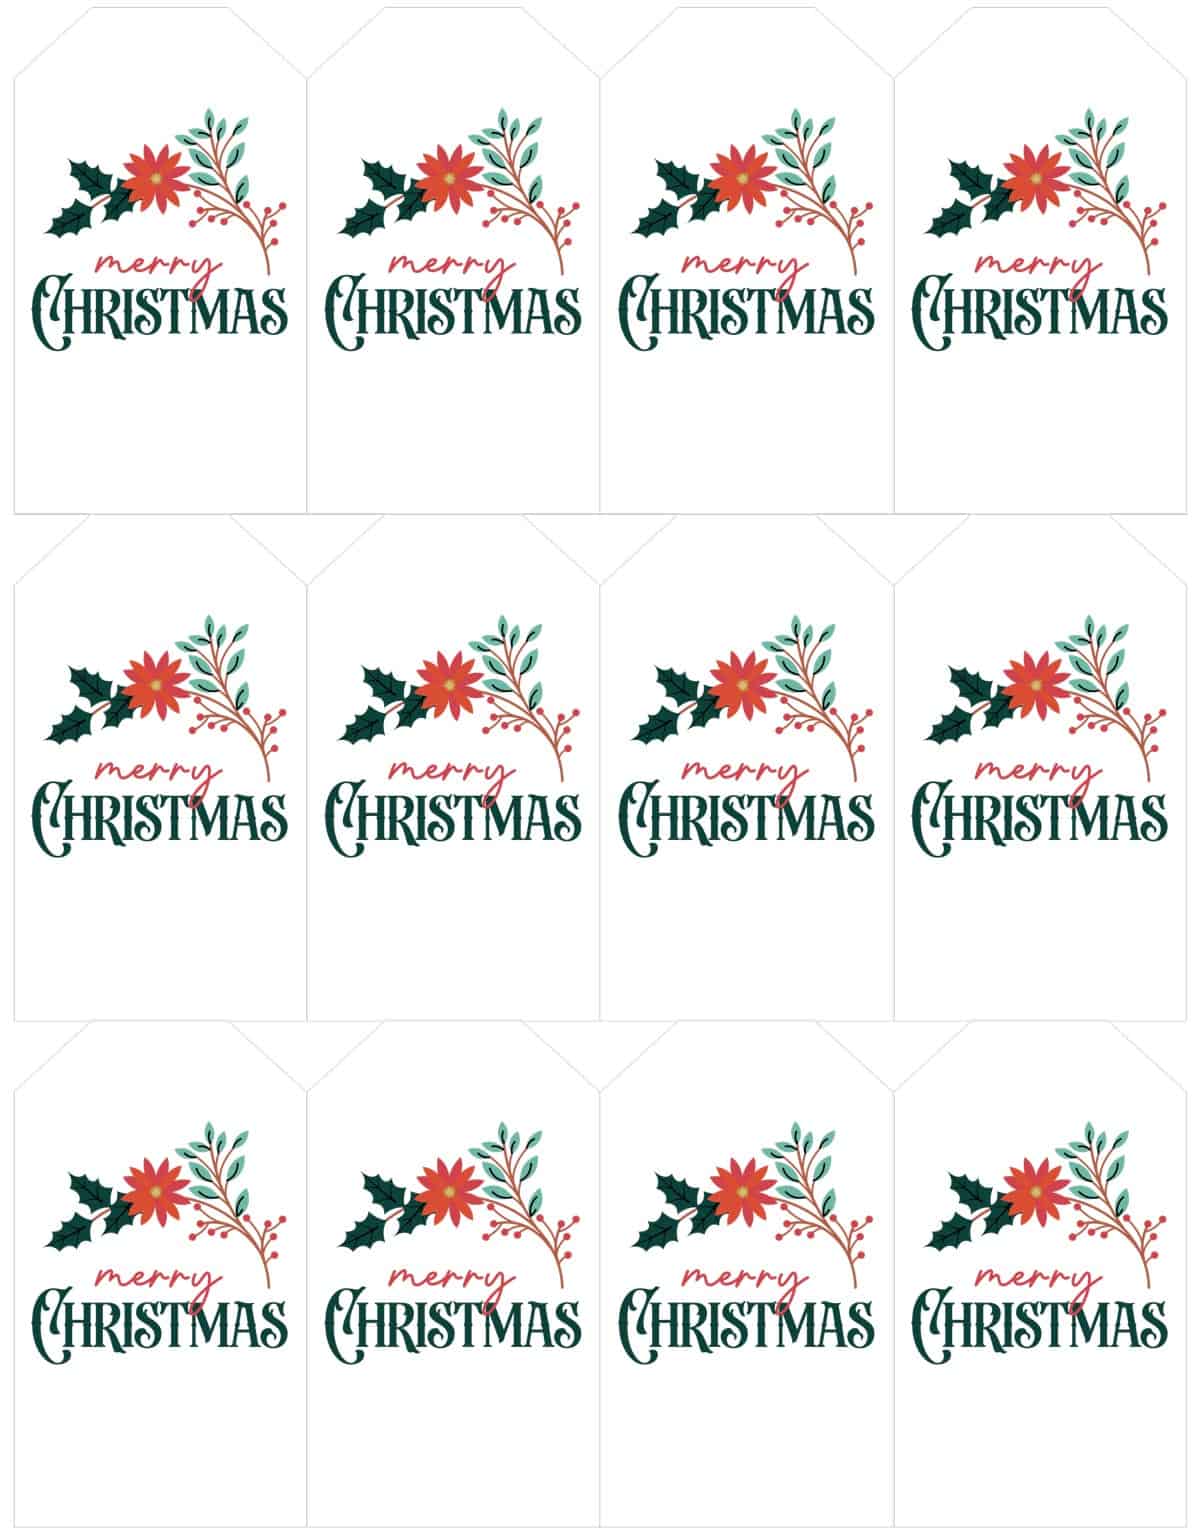 merry christmas tags to print by Skip to my Lou.